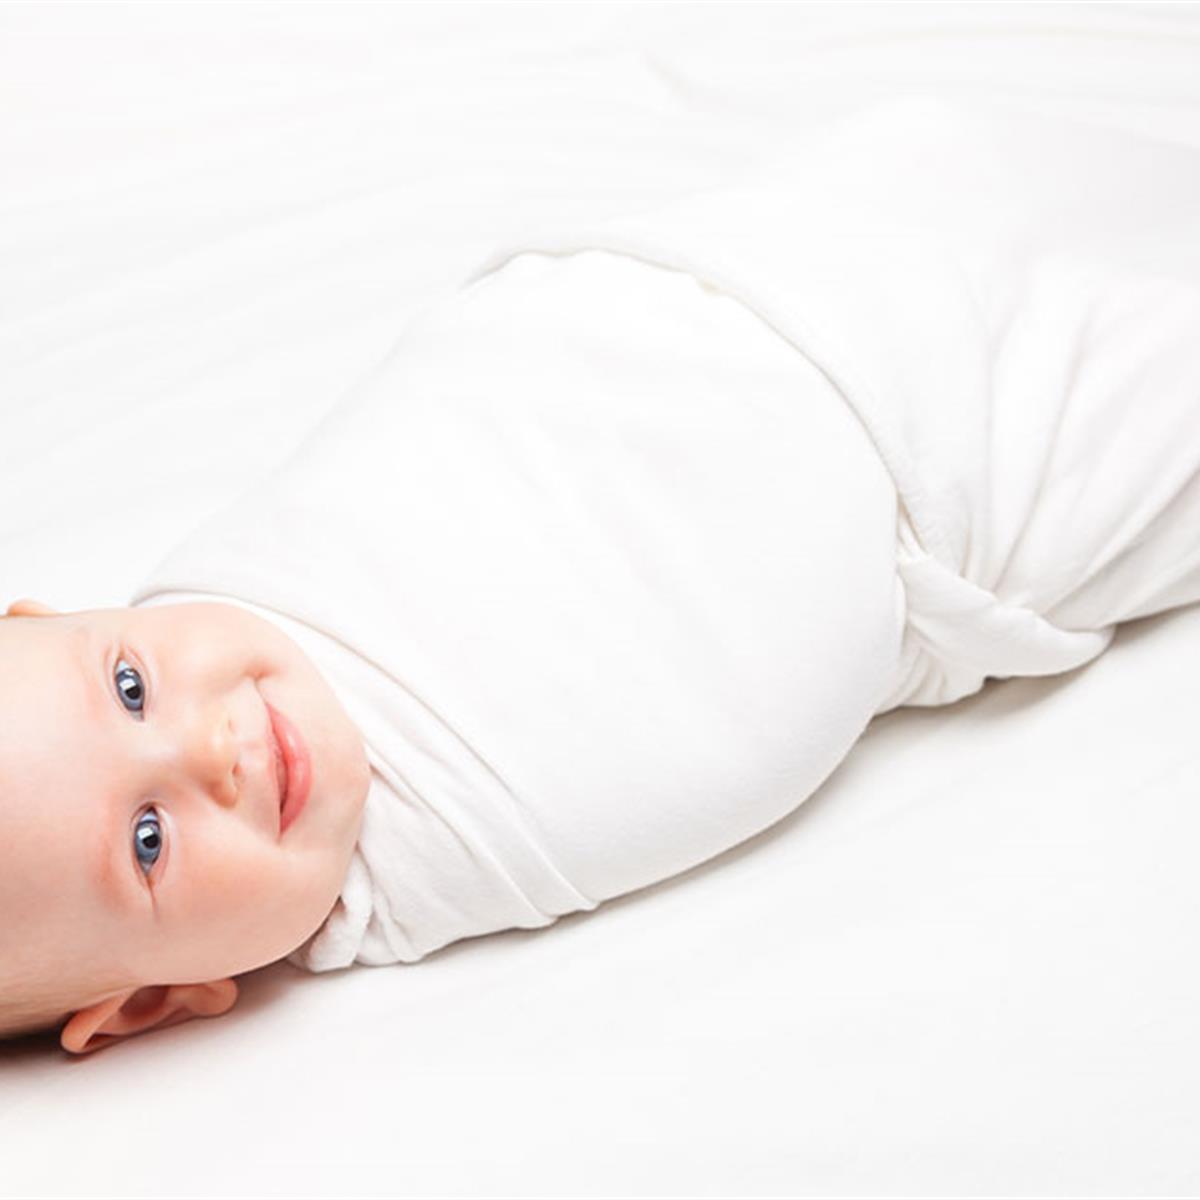 Swaddling: Is it Safe for Your Baby? 